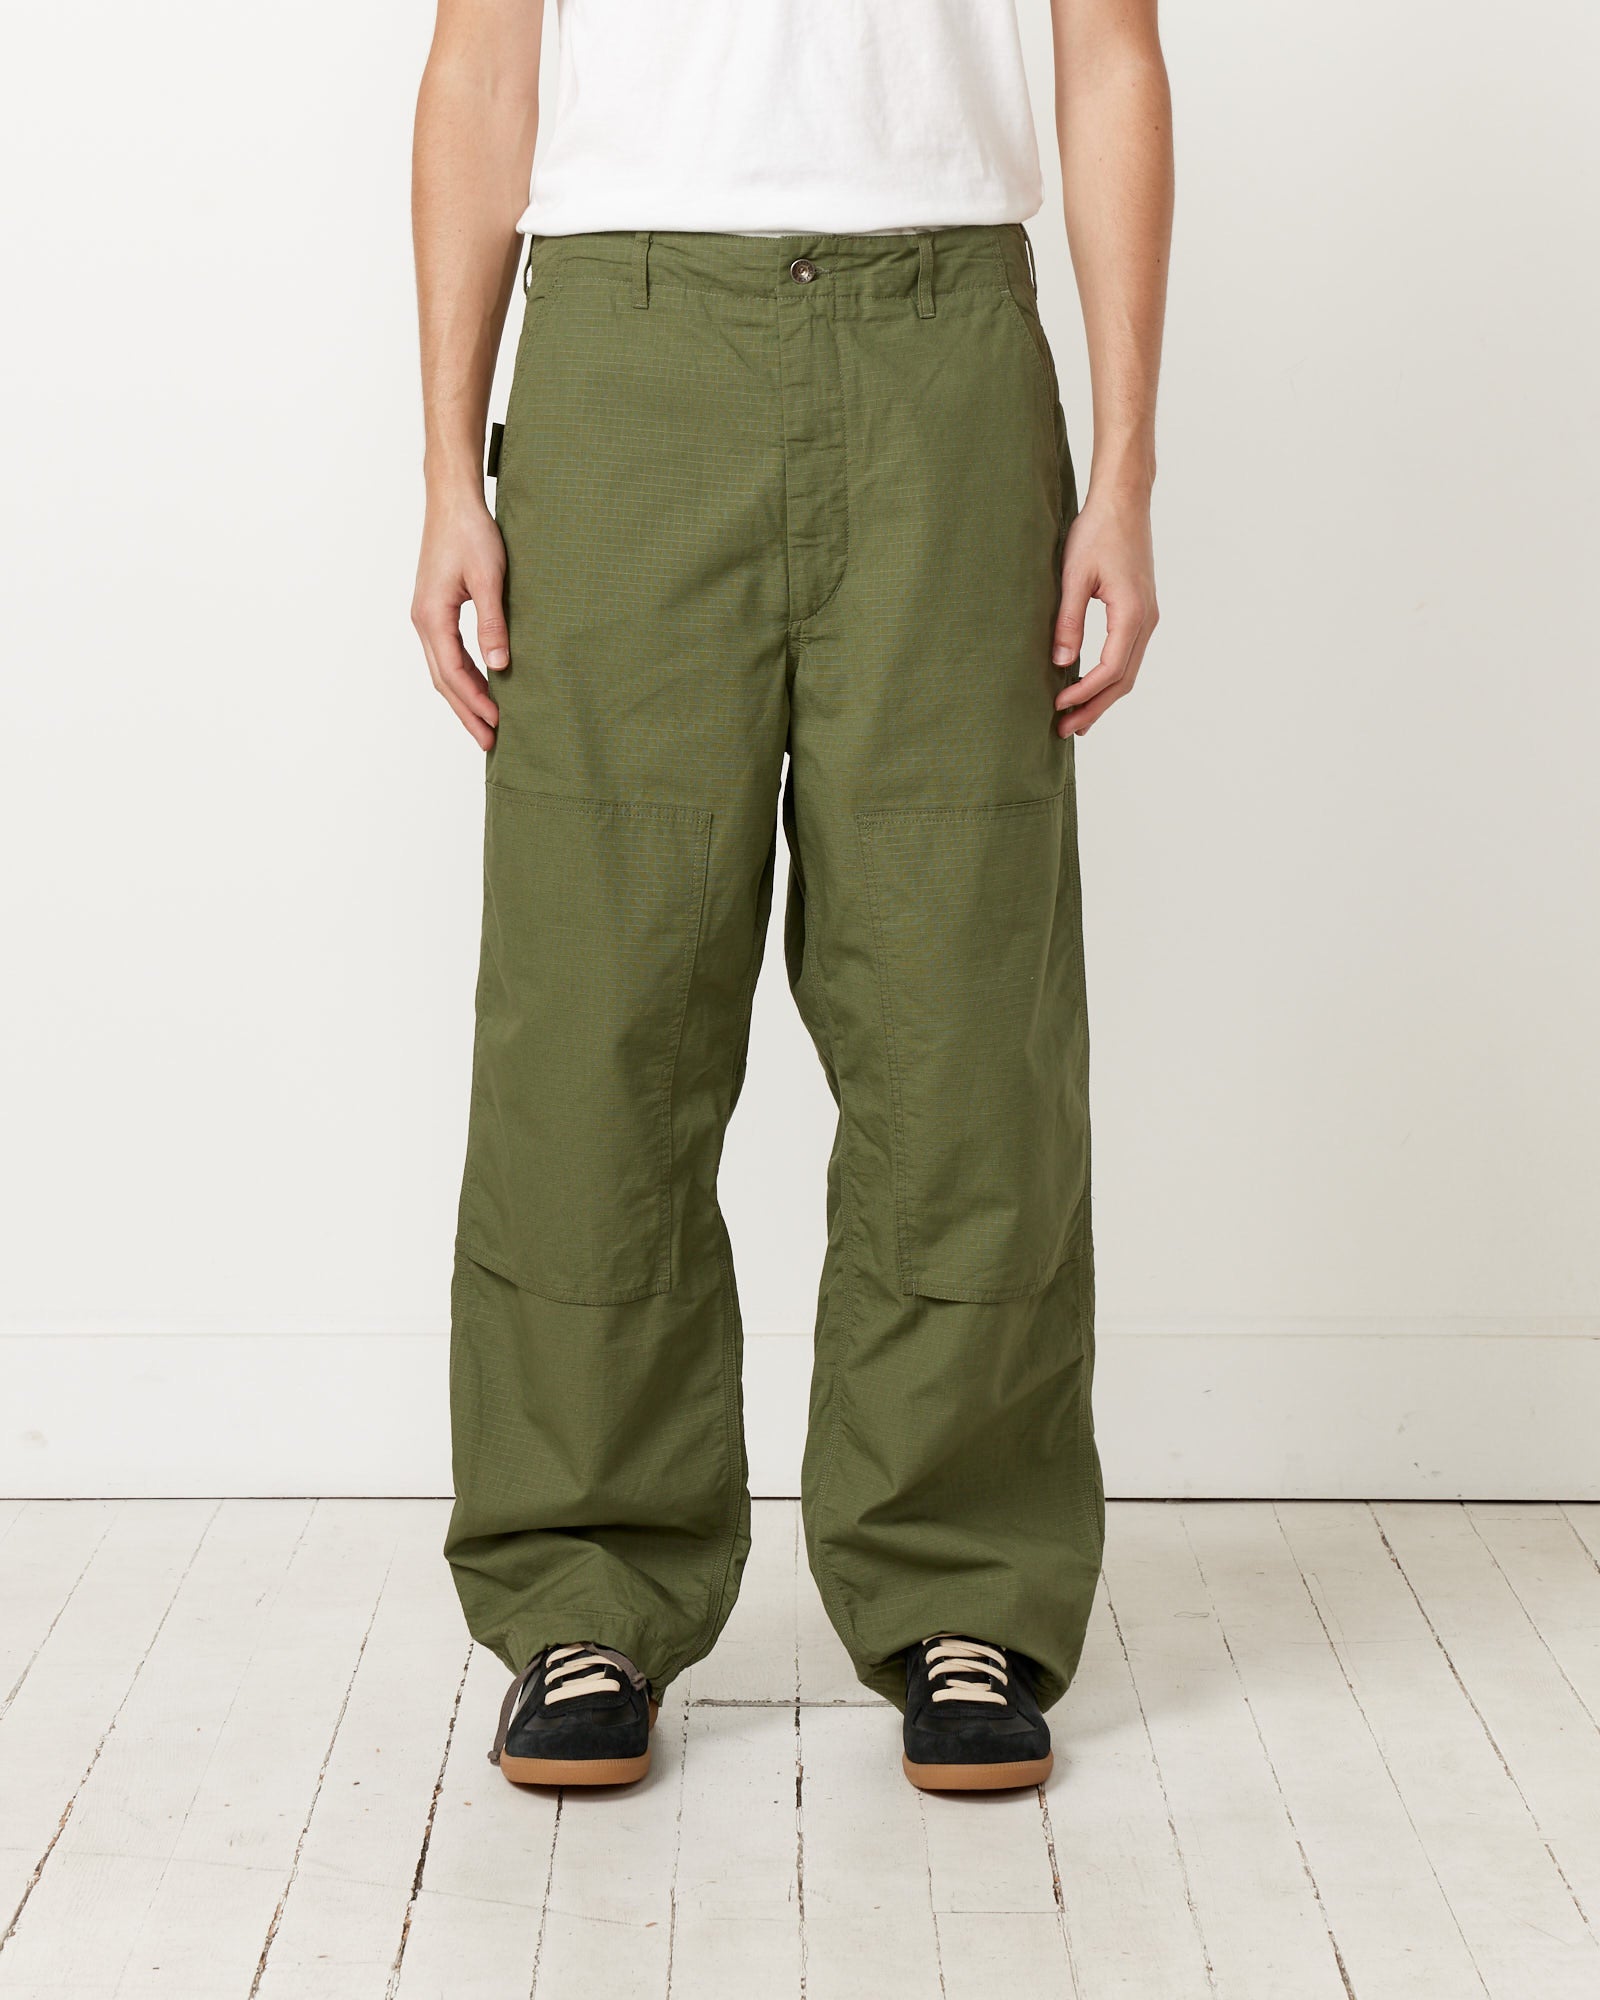 Painter Pant in Olive